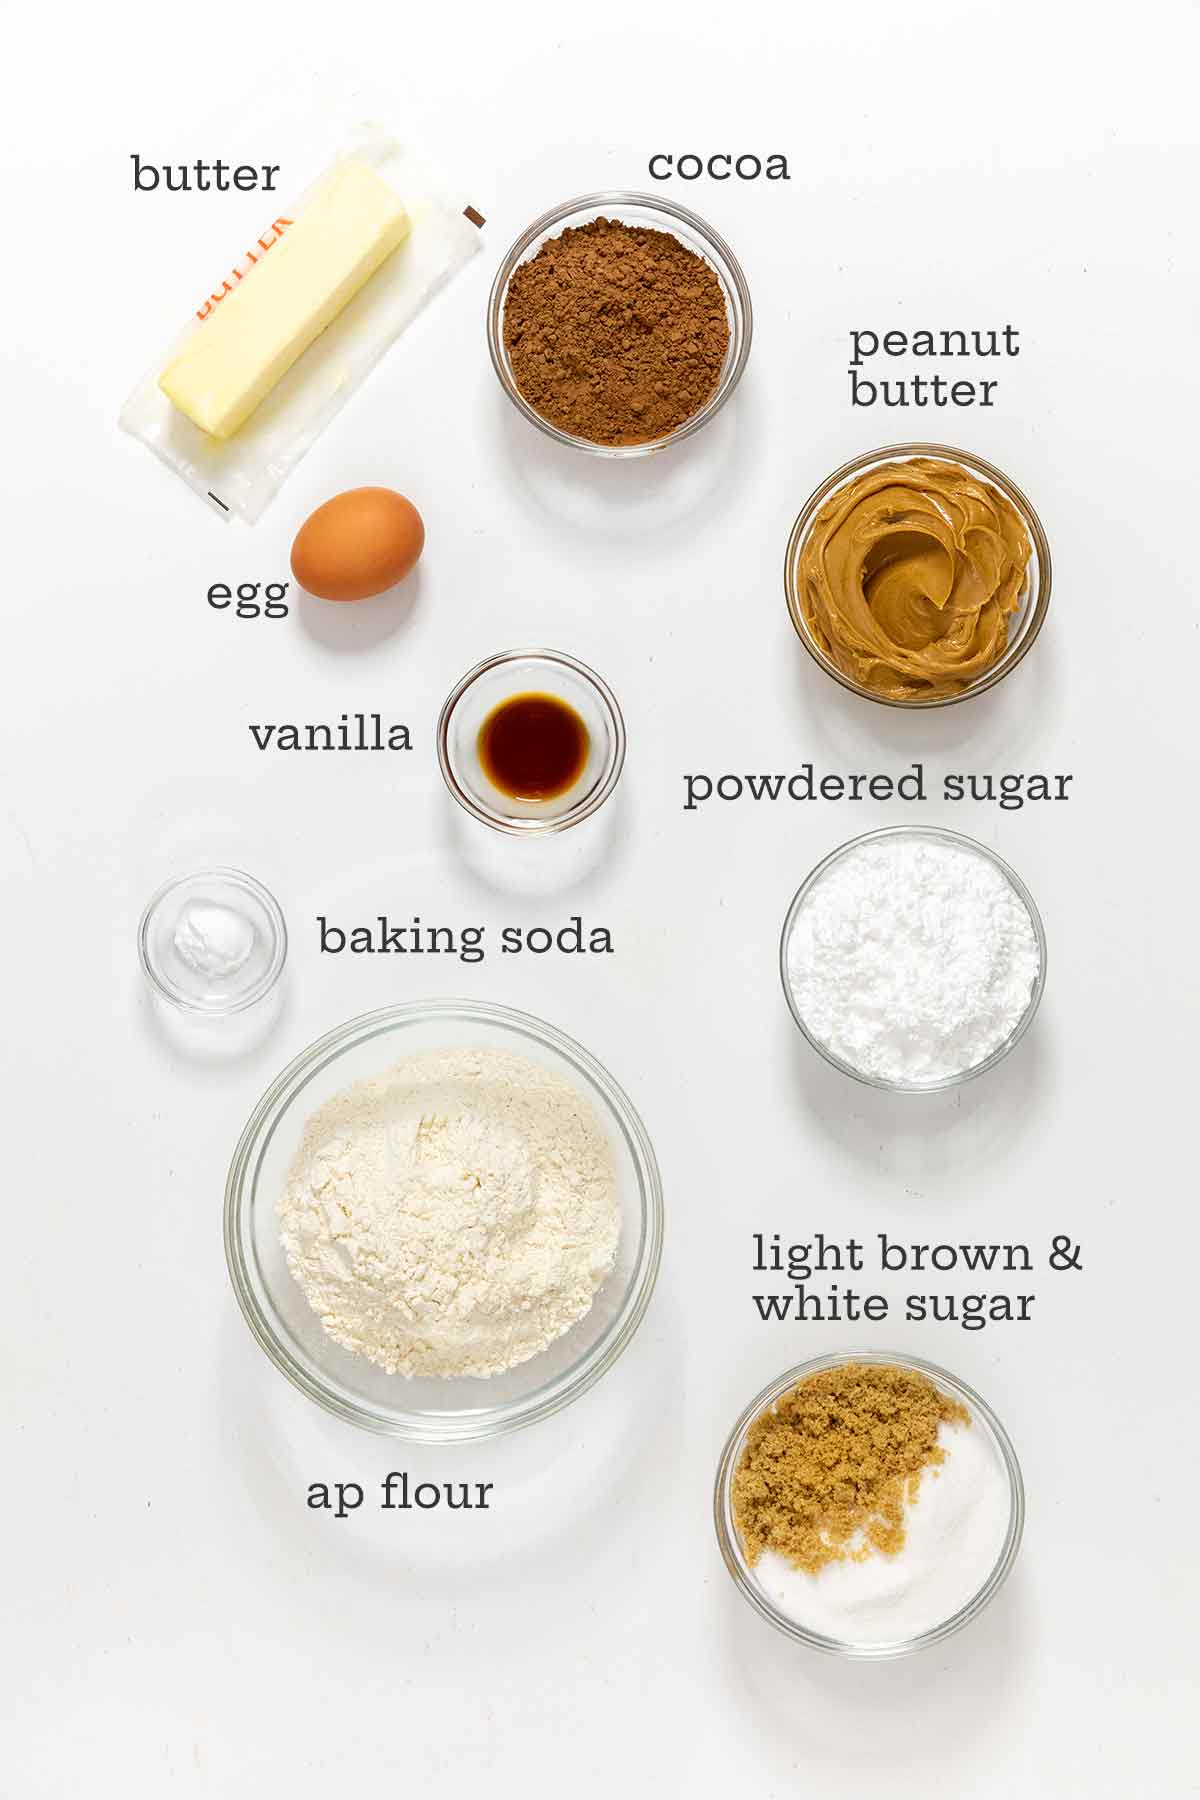 The ingredients for chocolate peanut butter cookies--flour, sugar, brown sugar, peanut butter, cocoa, butter, egg, vanilla, and salt.